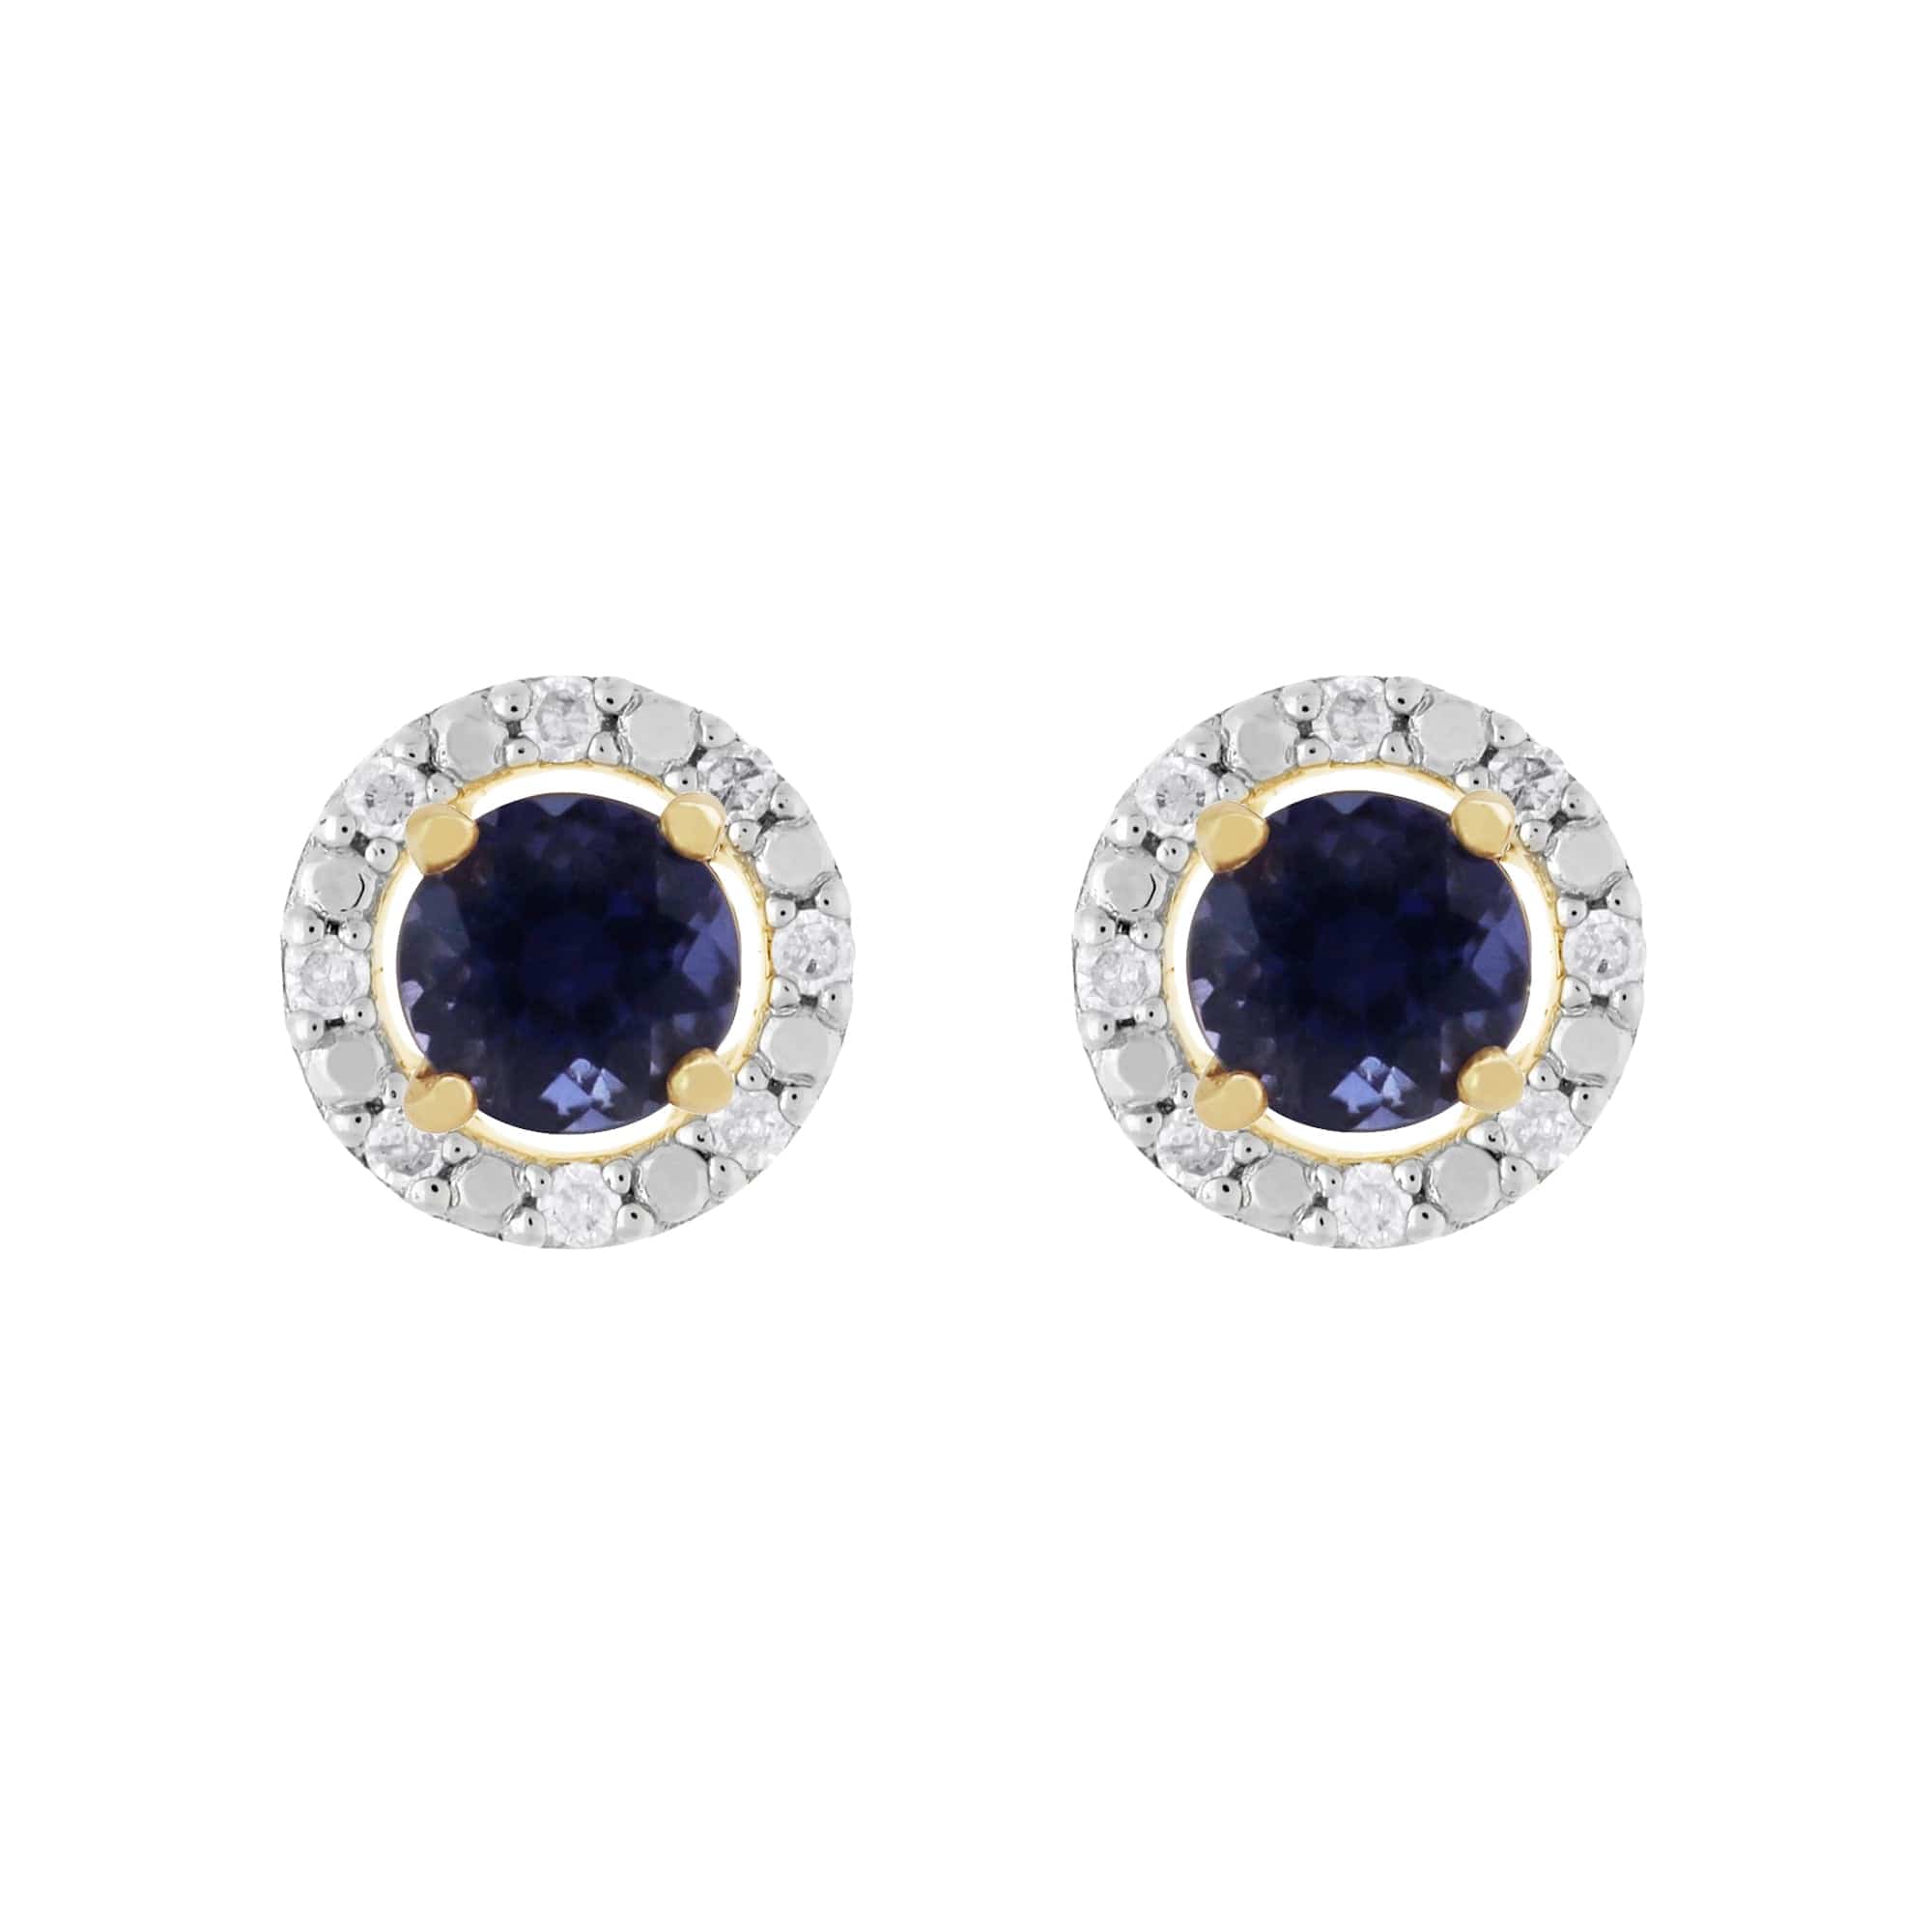 11556-191E0376019 Classic Round Iolite Stud Earrings with Detachable Diamond Round Earrings Jacket Set in 9ct Yellow Gold 1